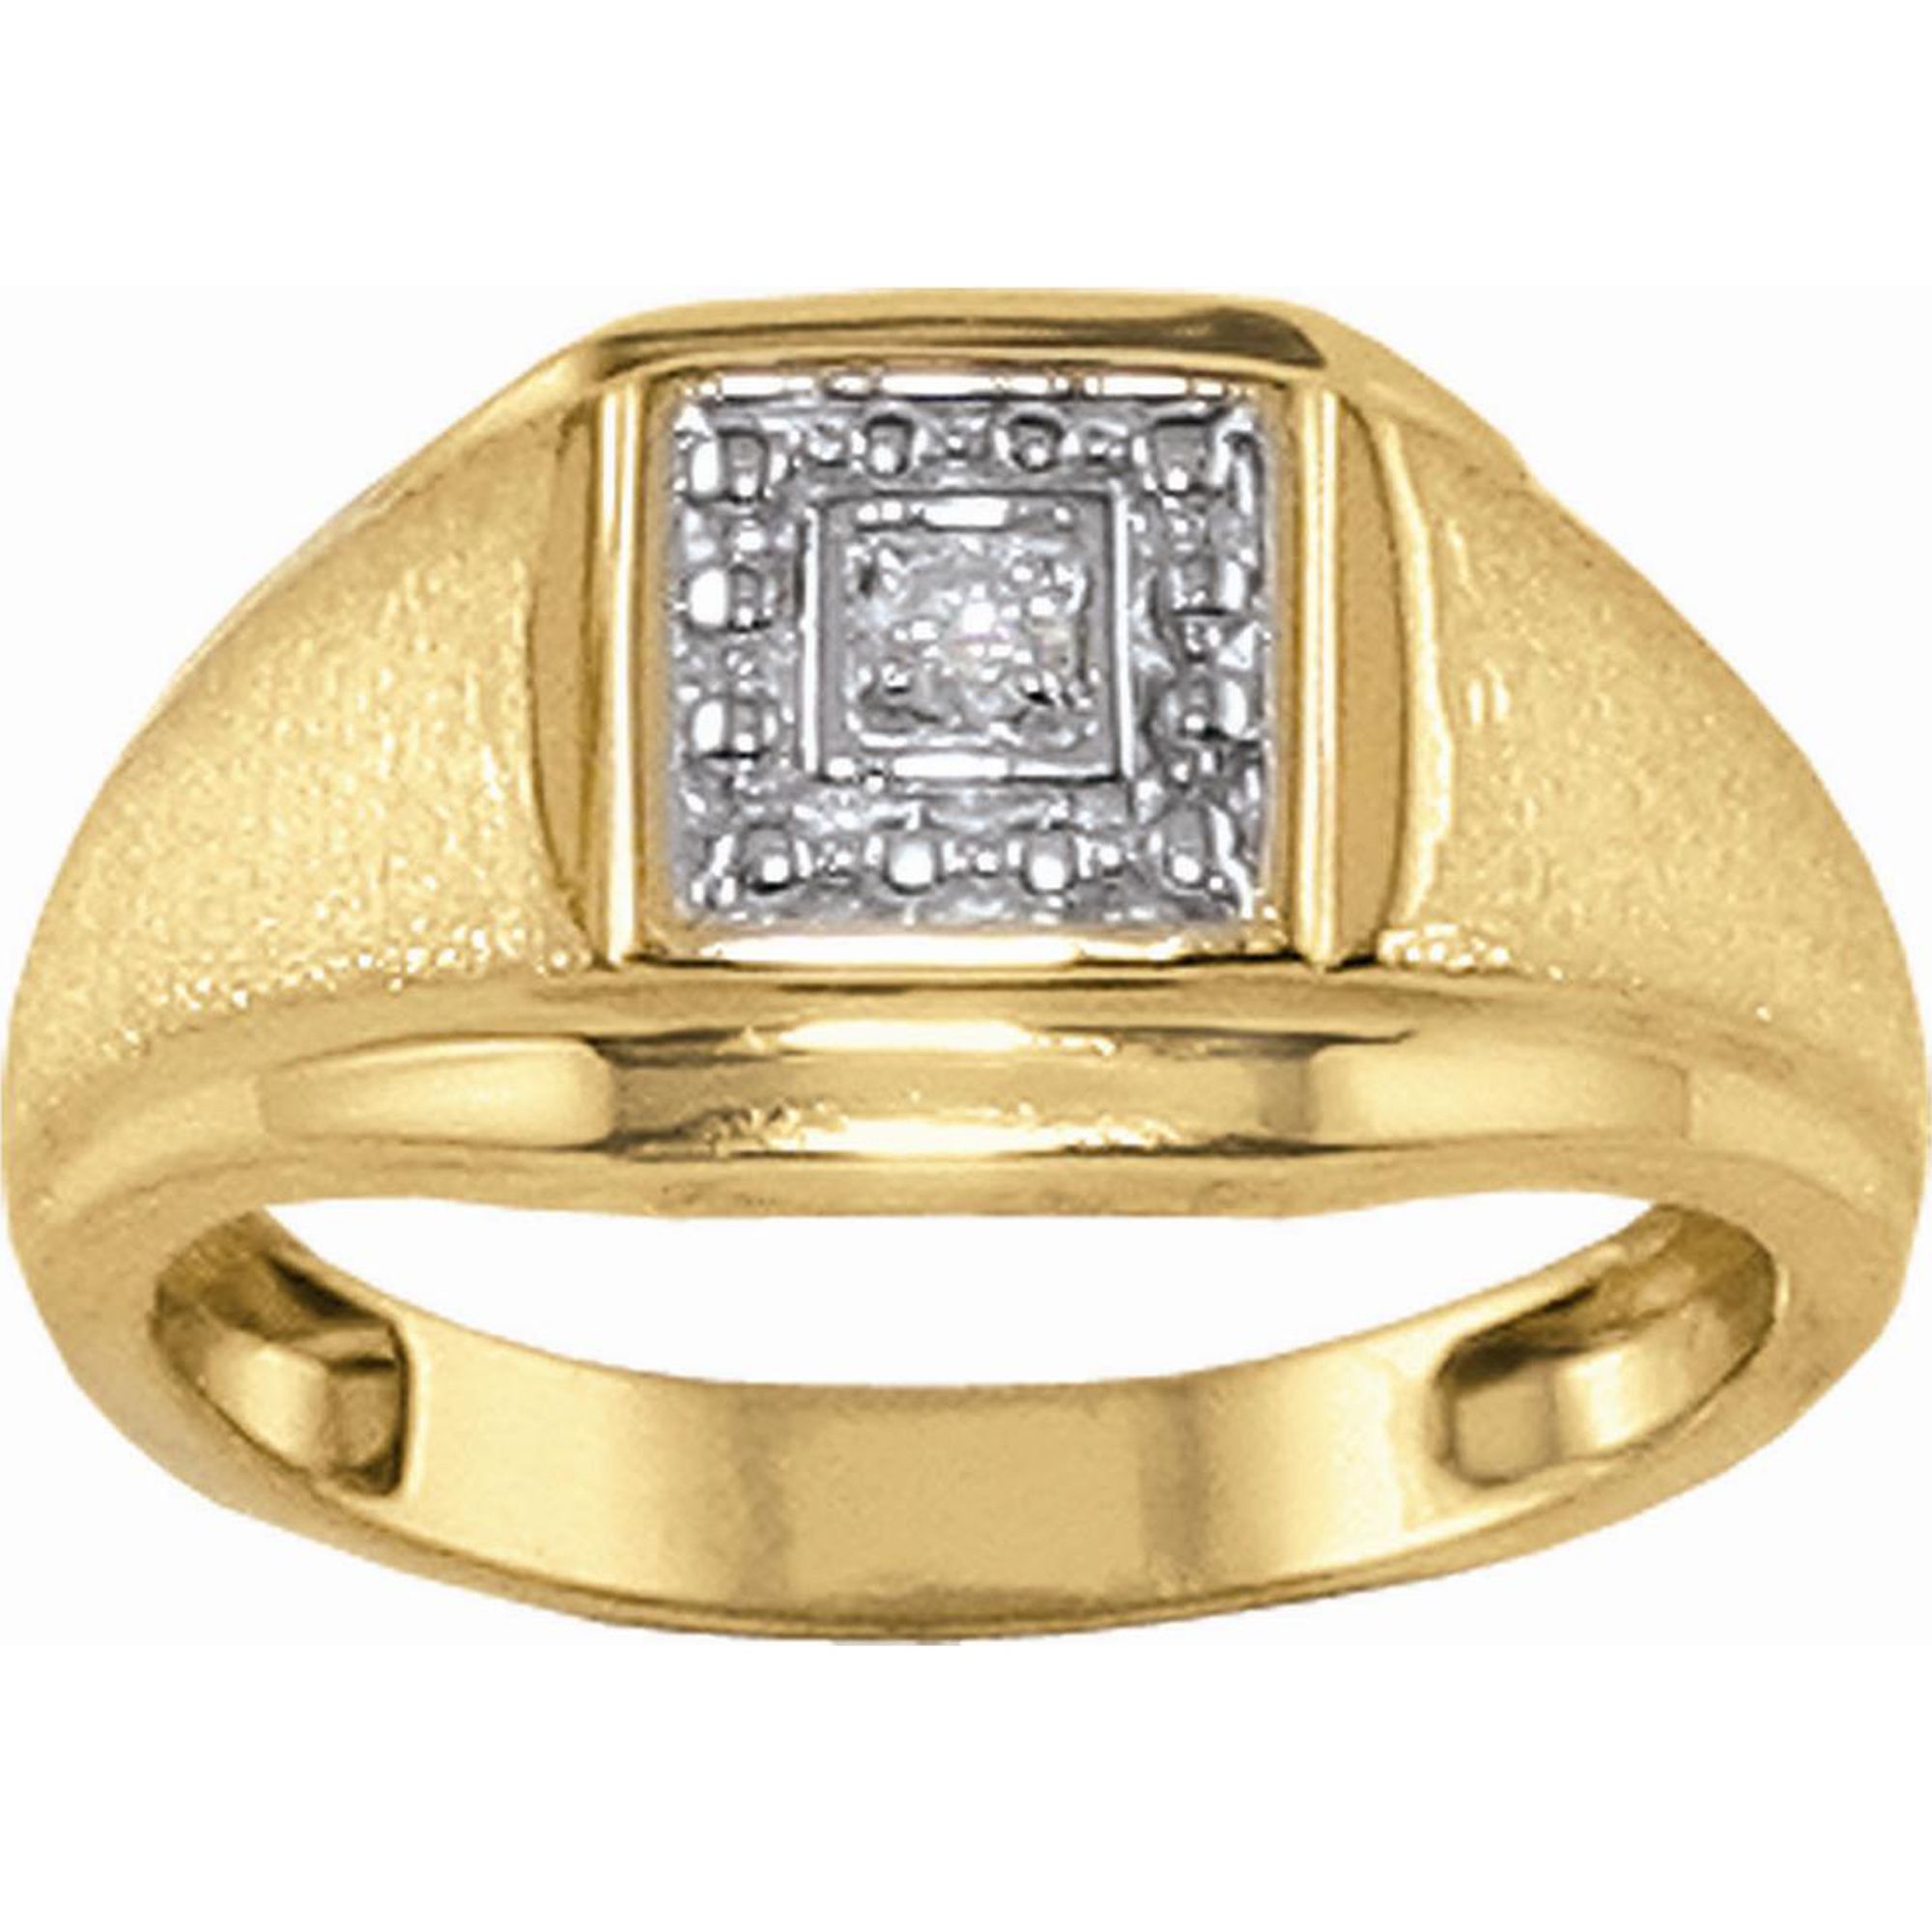 Mens Round Diamond Accent Ring with Bead Design in 10K Yellow Gold